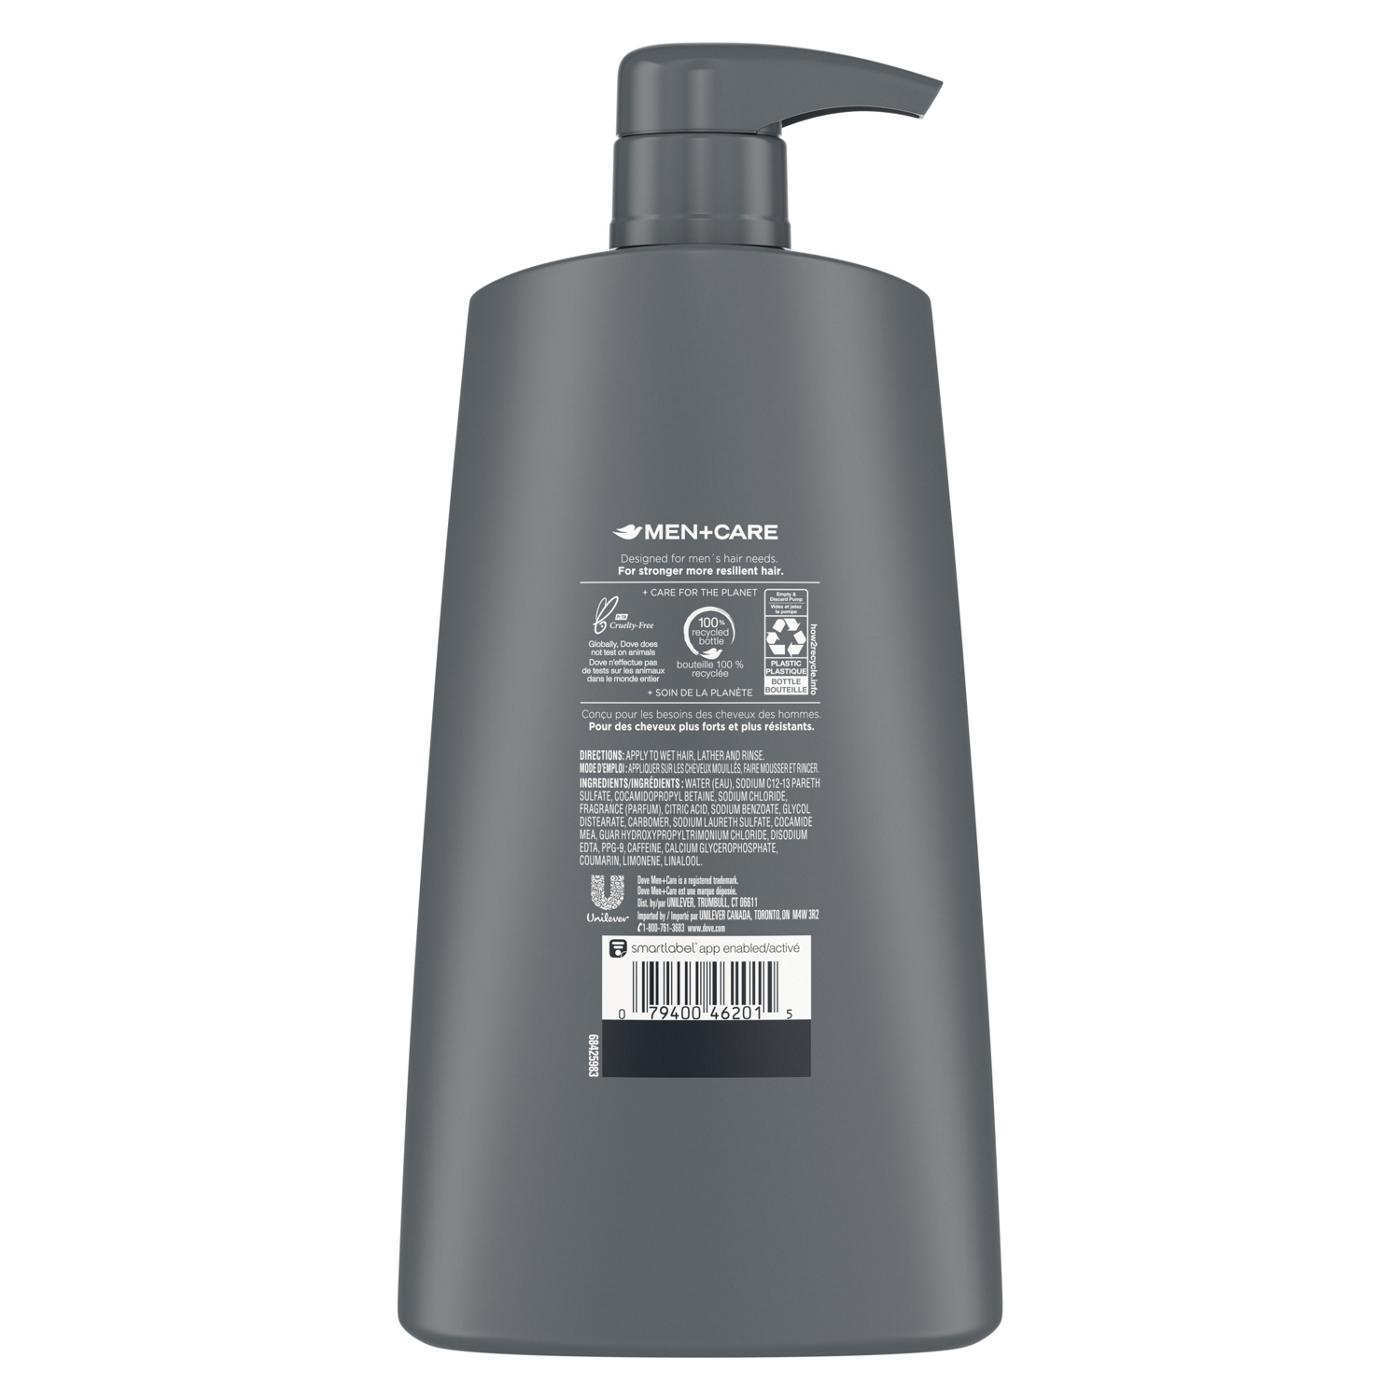 Dove Men+Care Shampoo + Conditioner - Thick & Strong; image 6 of 6